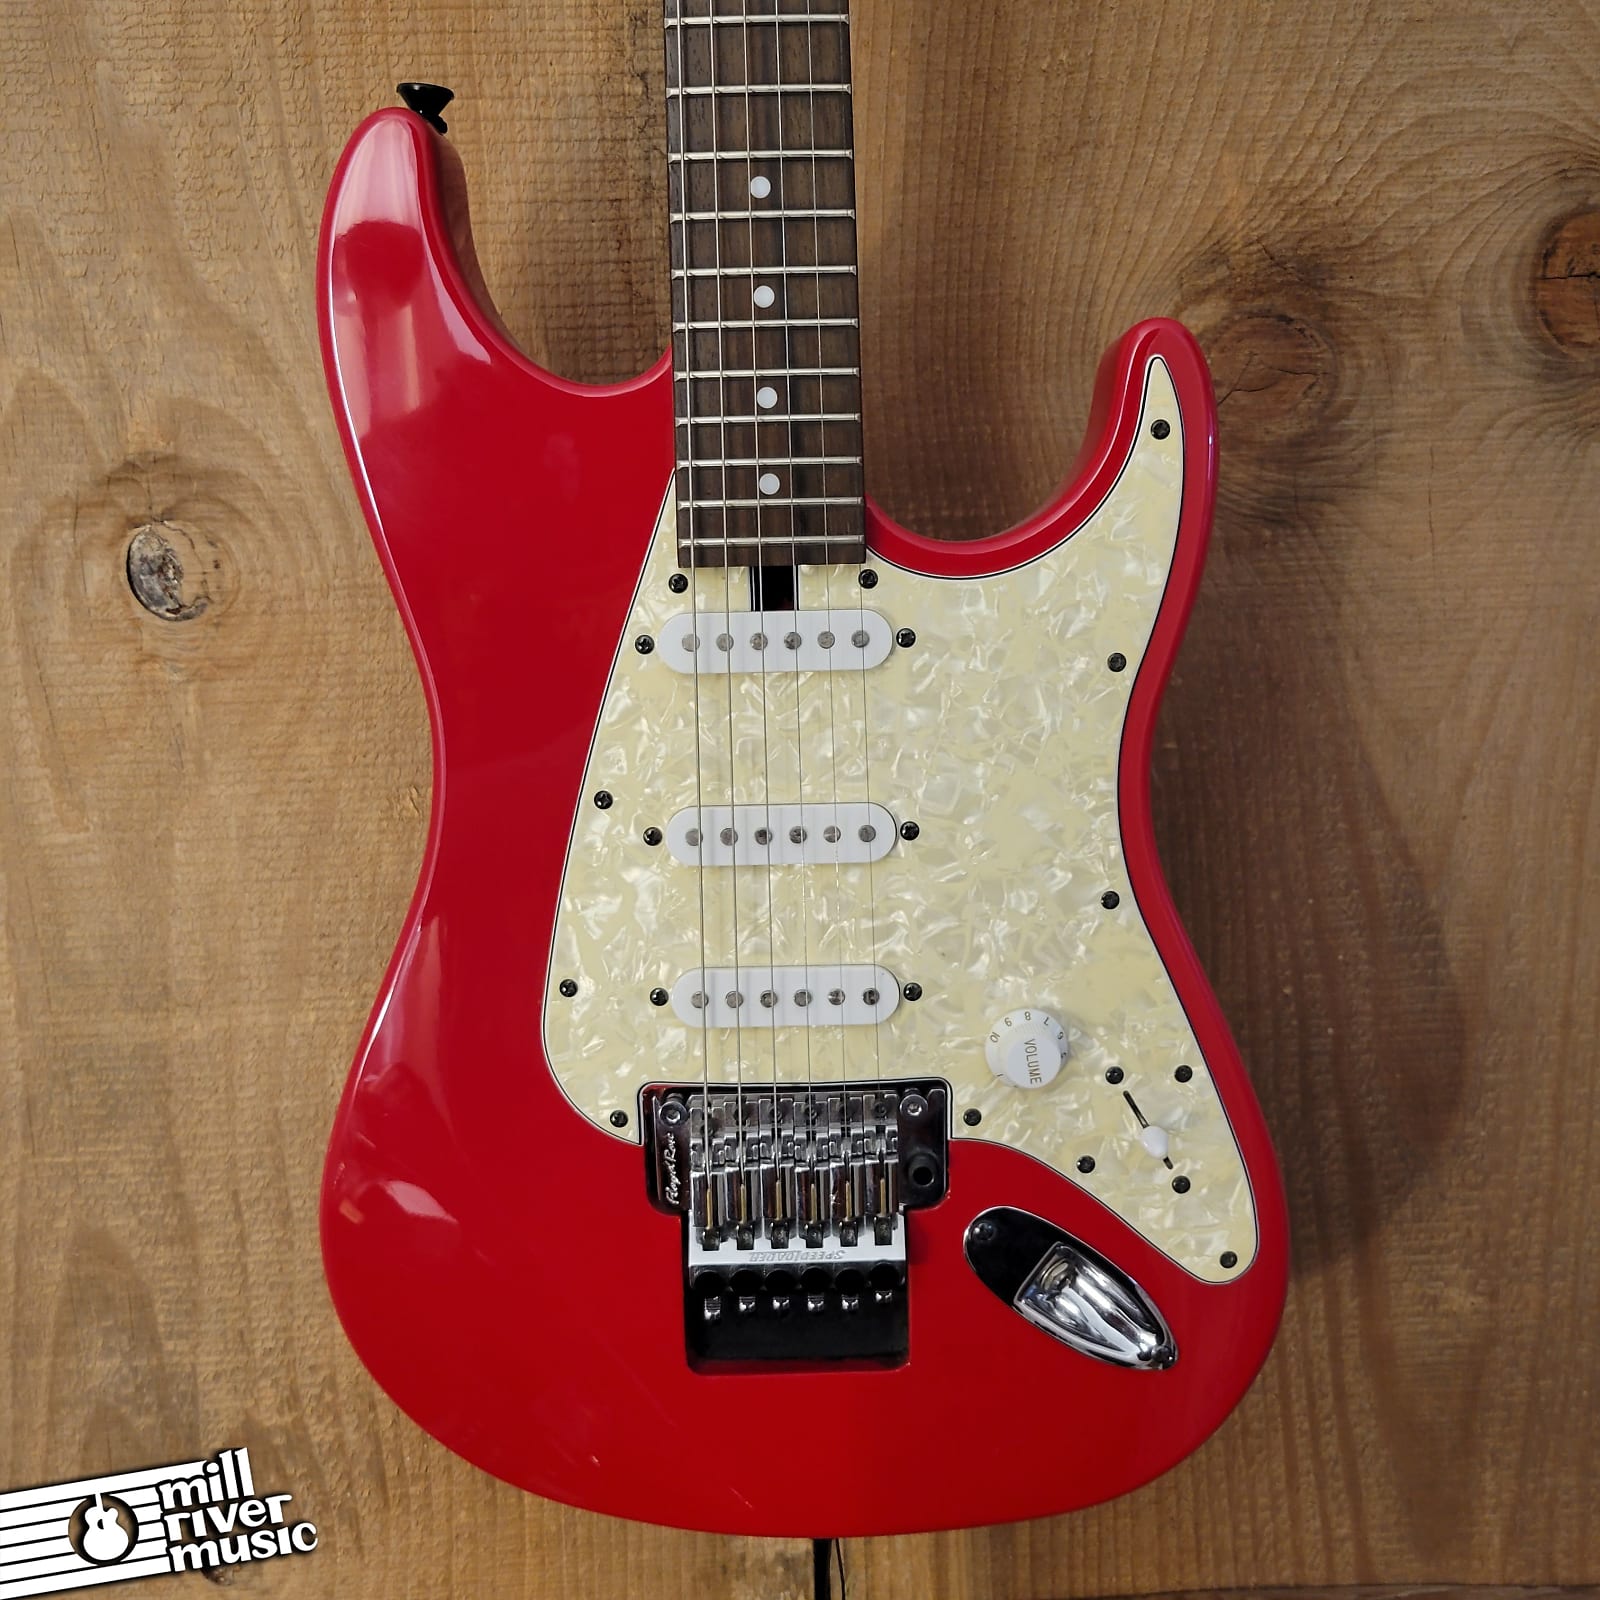 Floyd Rose Discovery Series DST-3 Red Finish S-Style Guitar Used